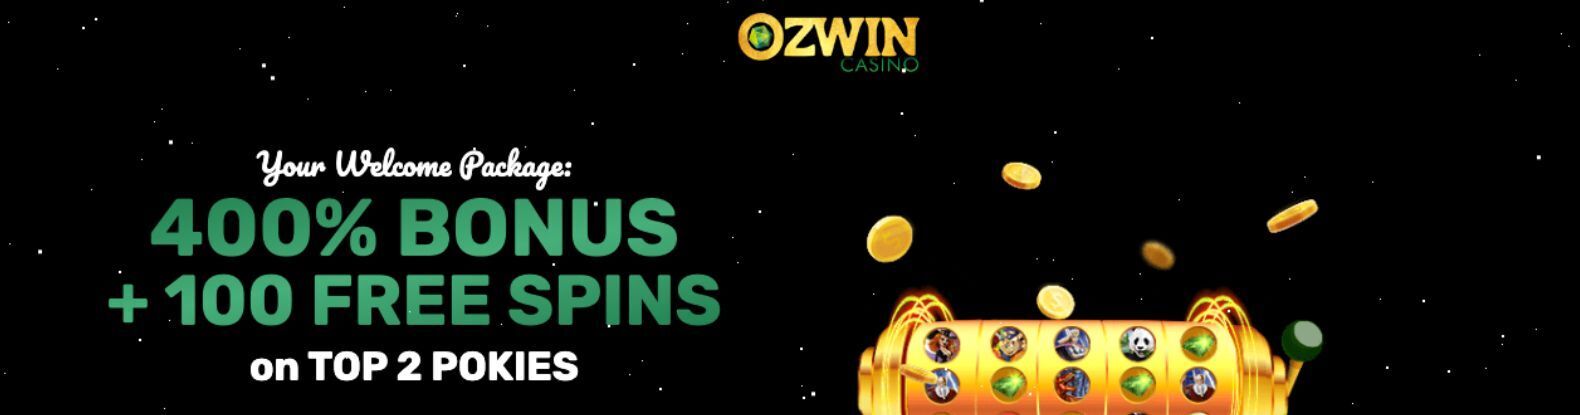 This is a screenshot of the Welcome package at Ozwin Casino